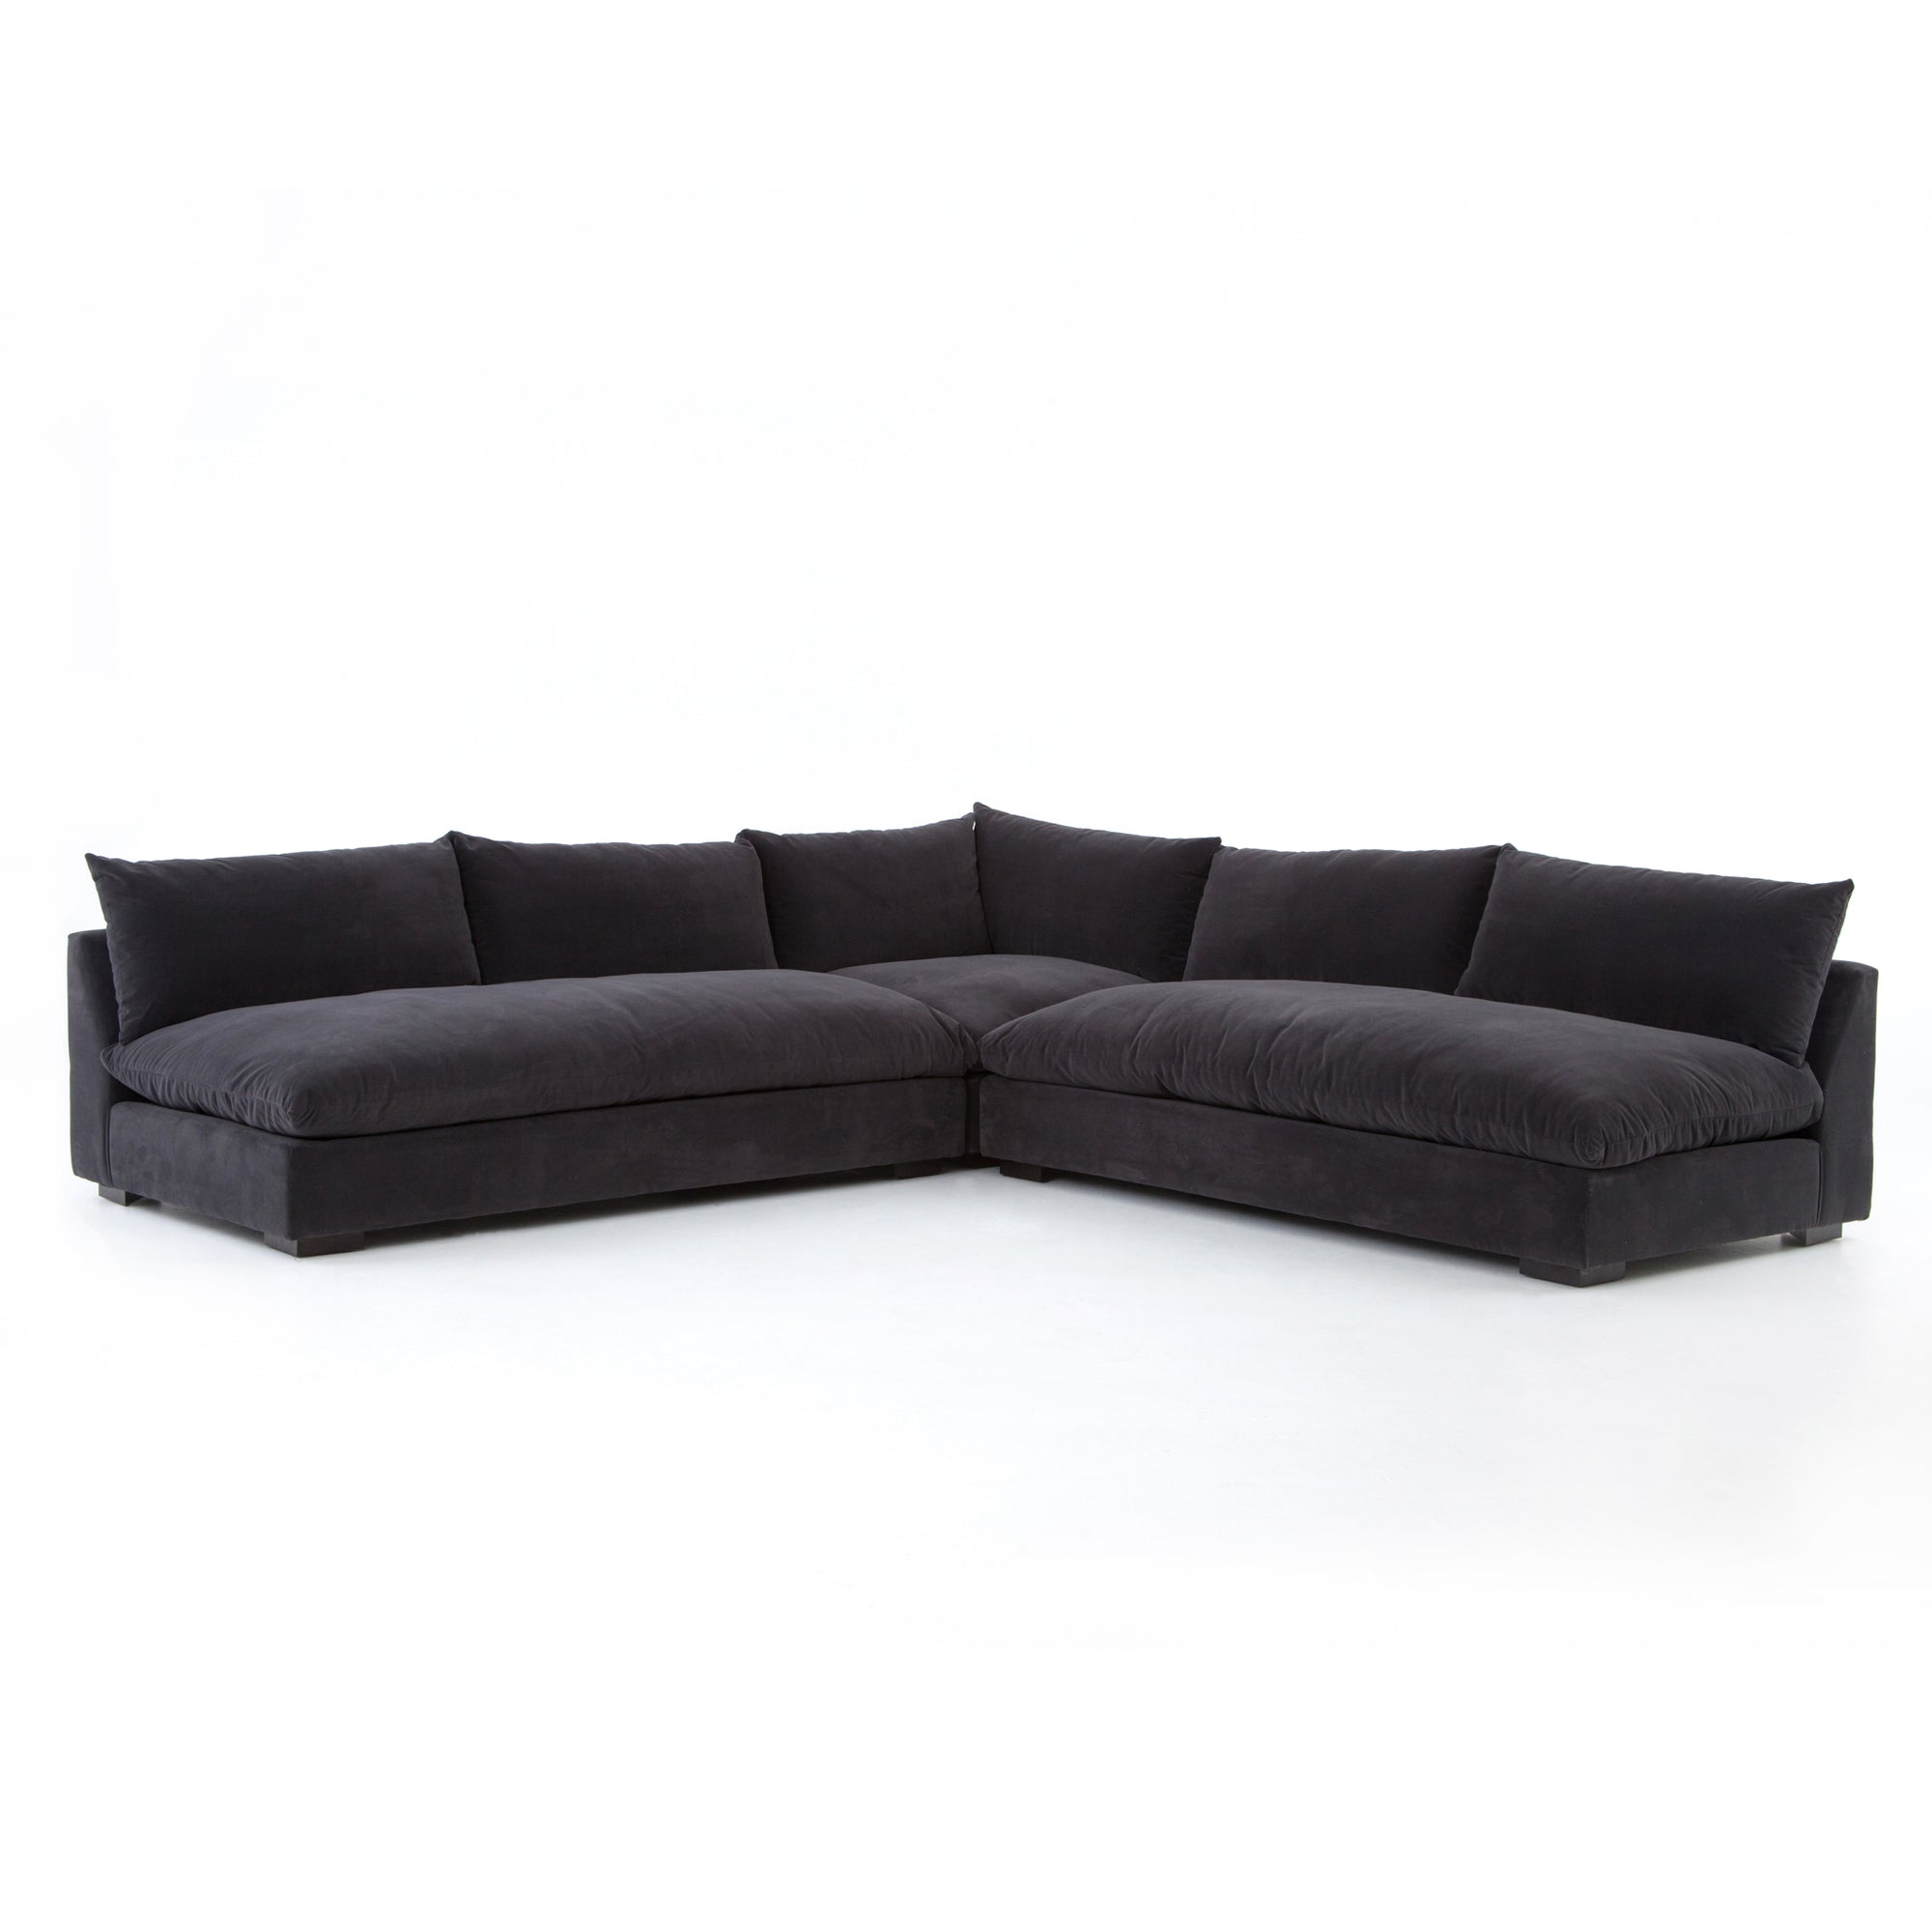 Grant 3 Pc Sectional